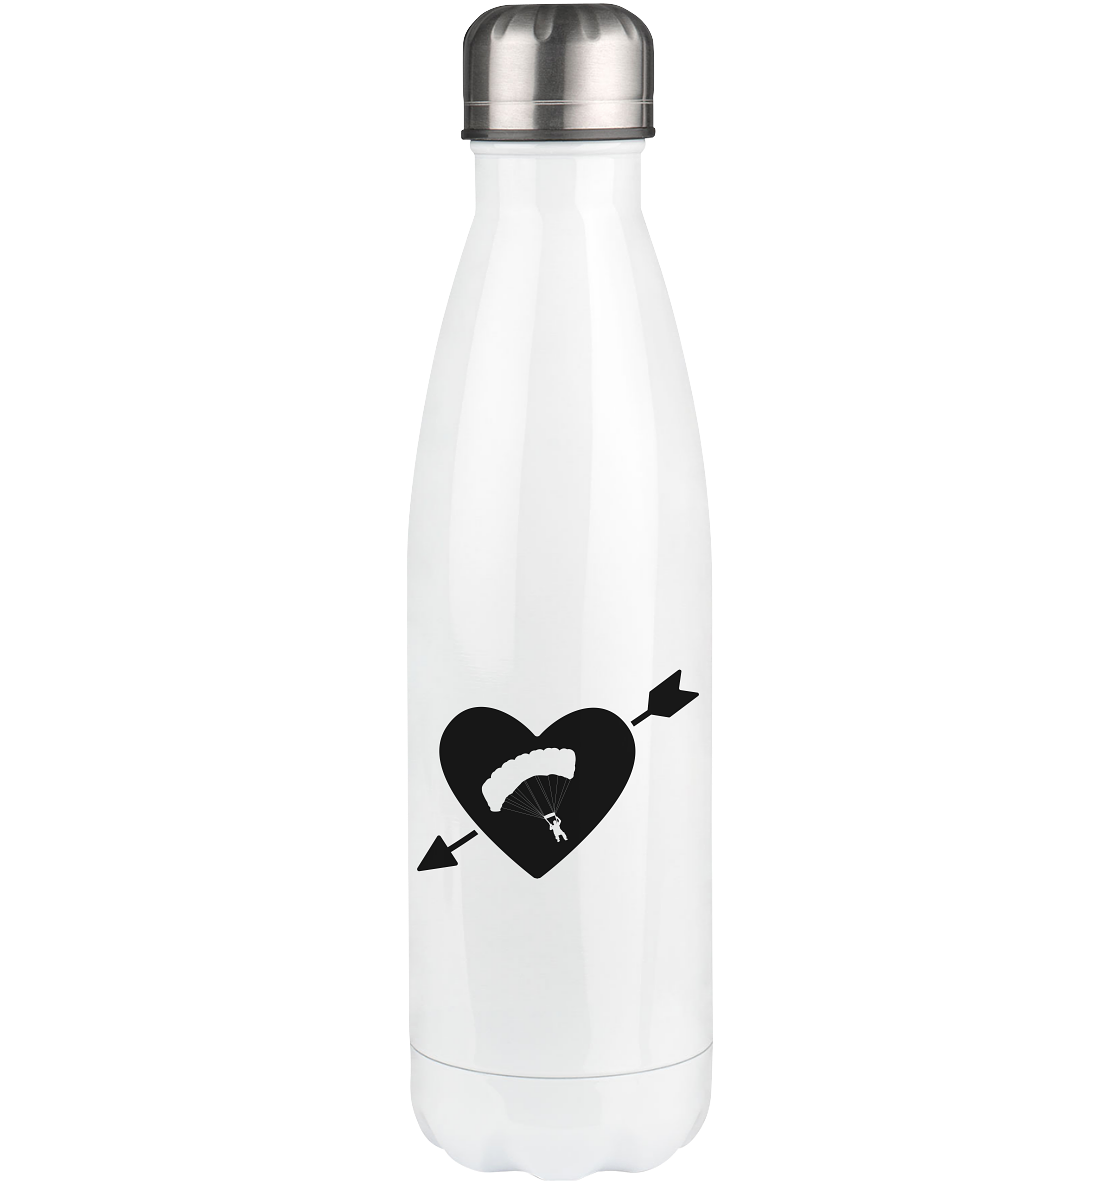 Arrow Heart and Paragliding - Edelstahl Thermosflasche berge 500ml